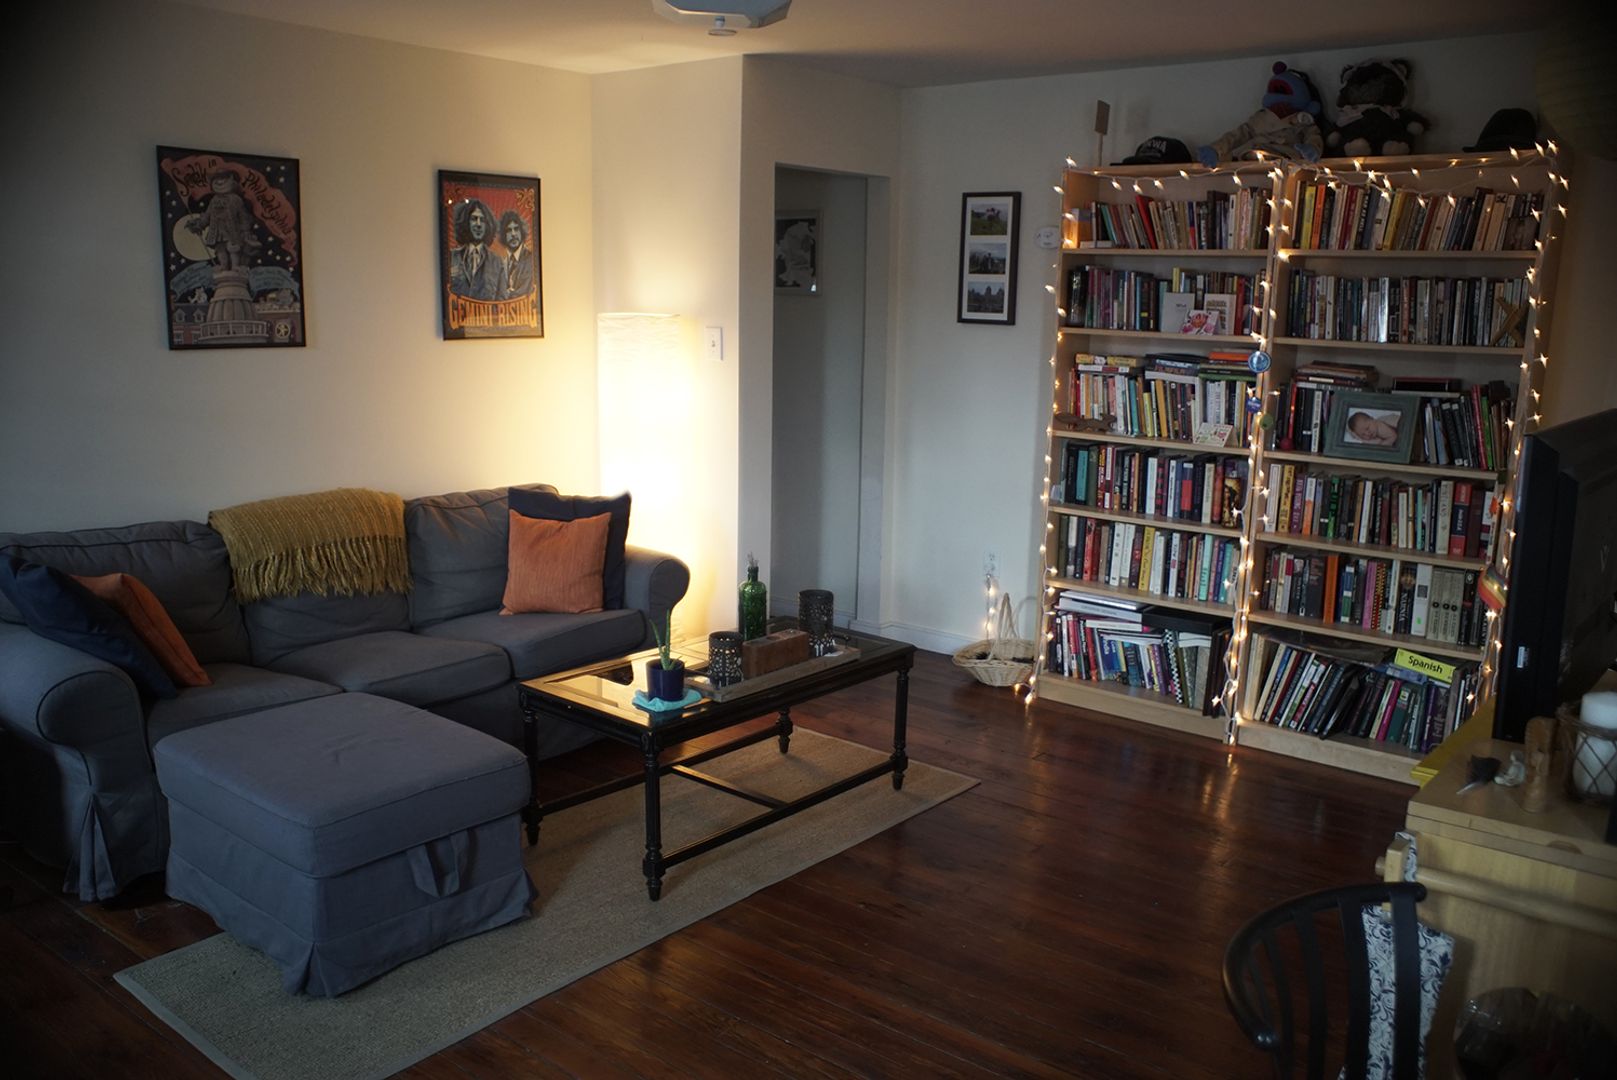 Charming 2-bedroom apartment in 829 North 26th Street.